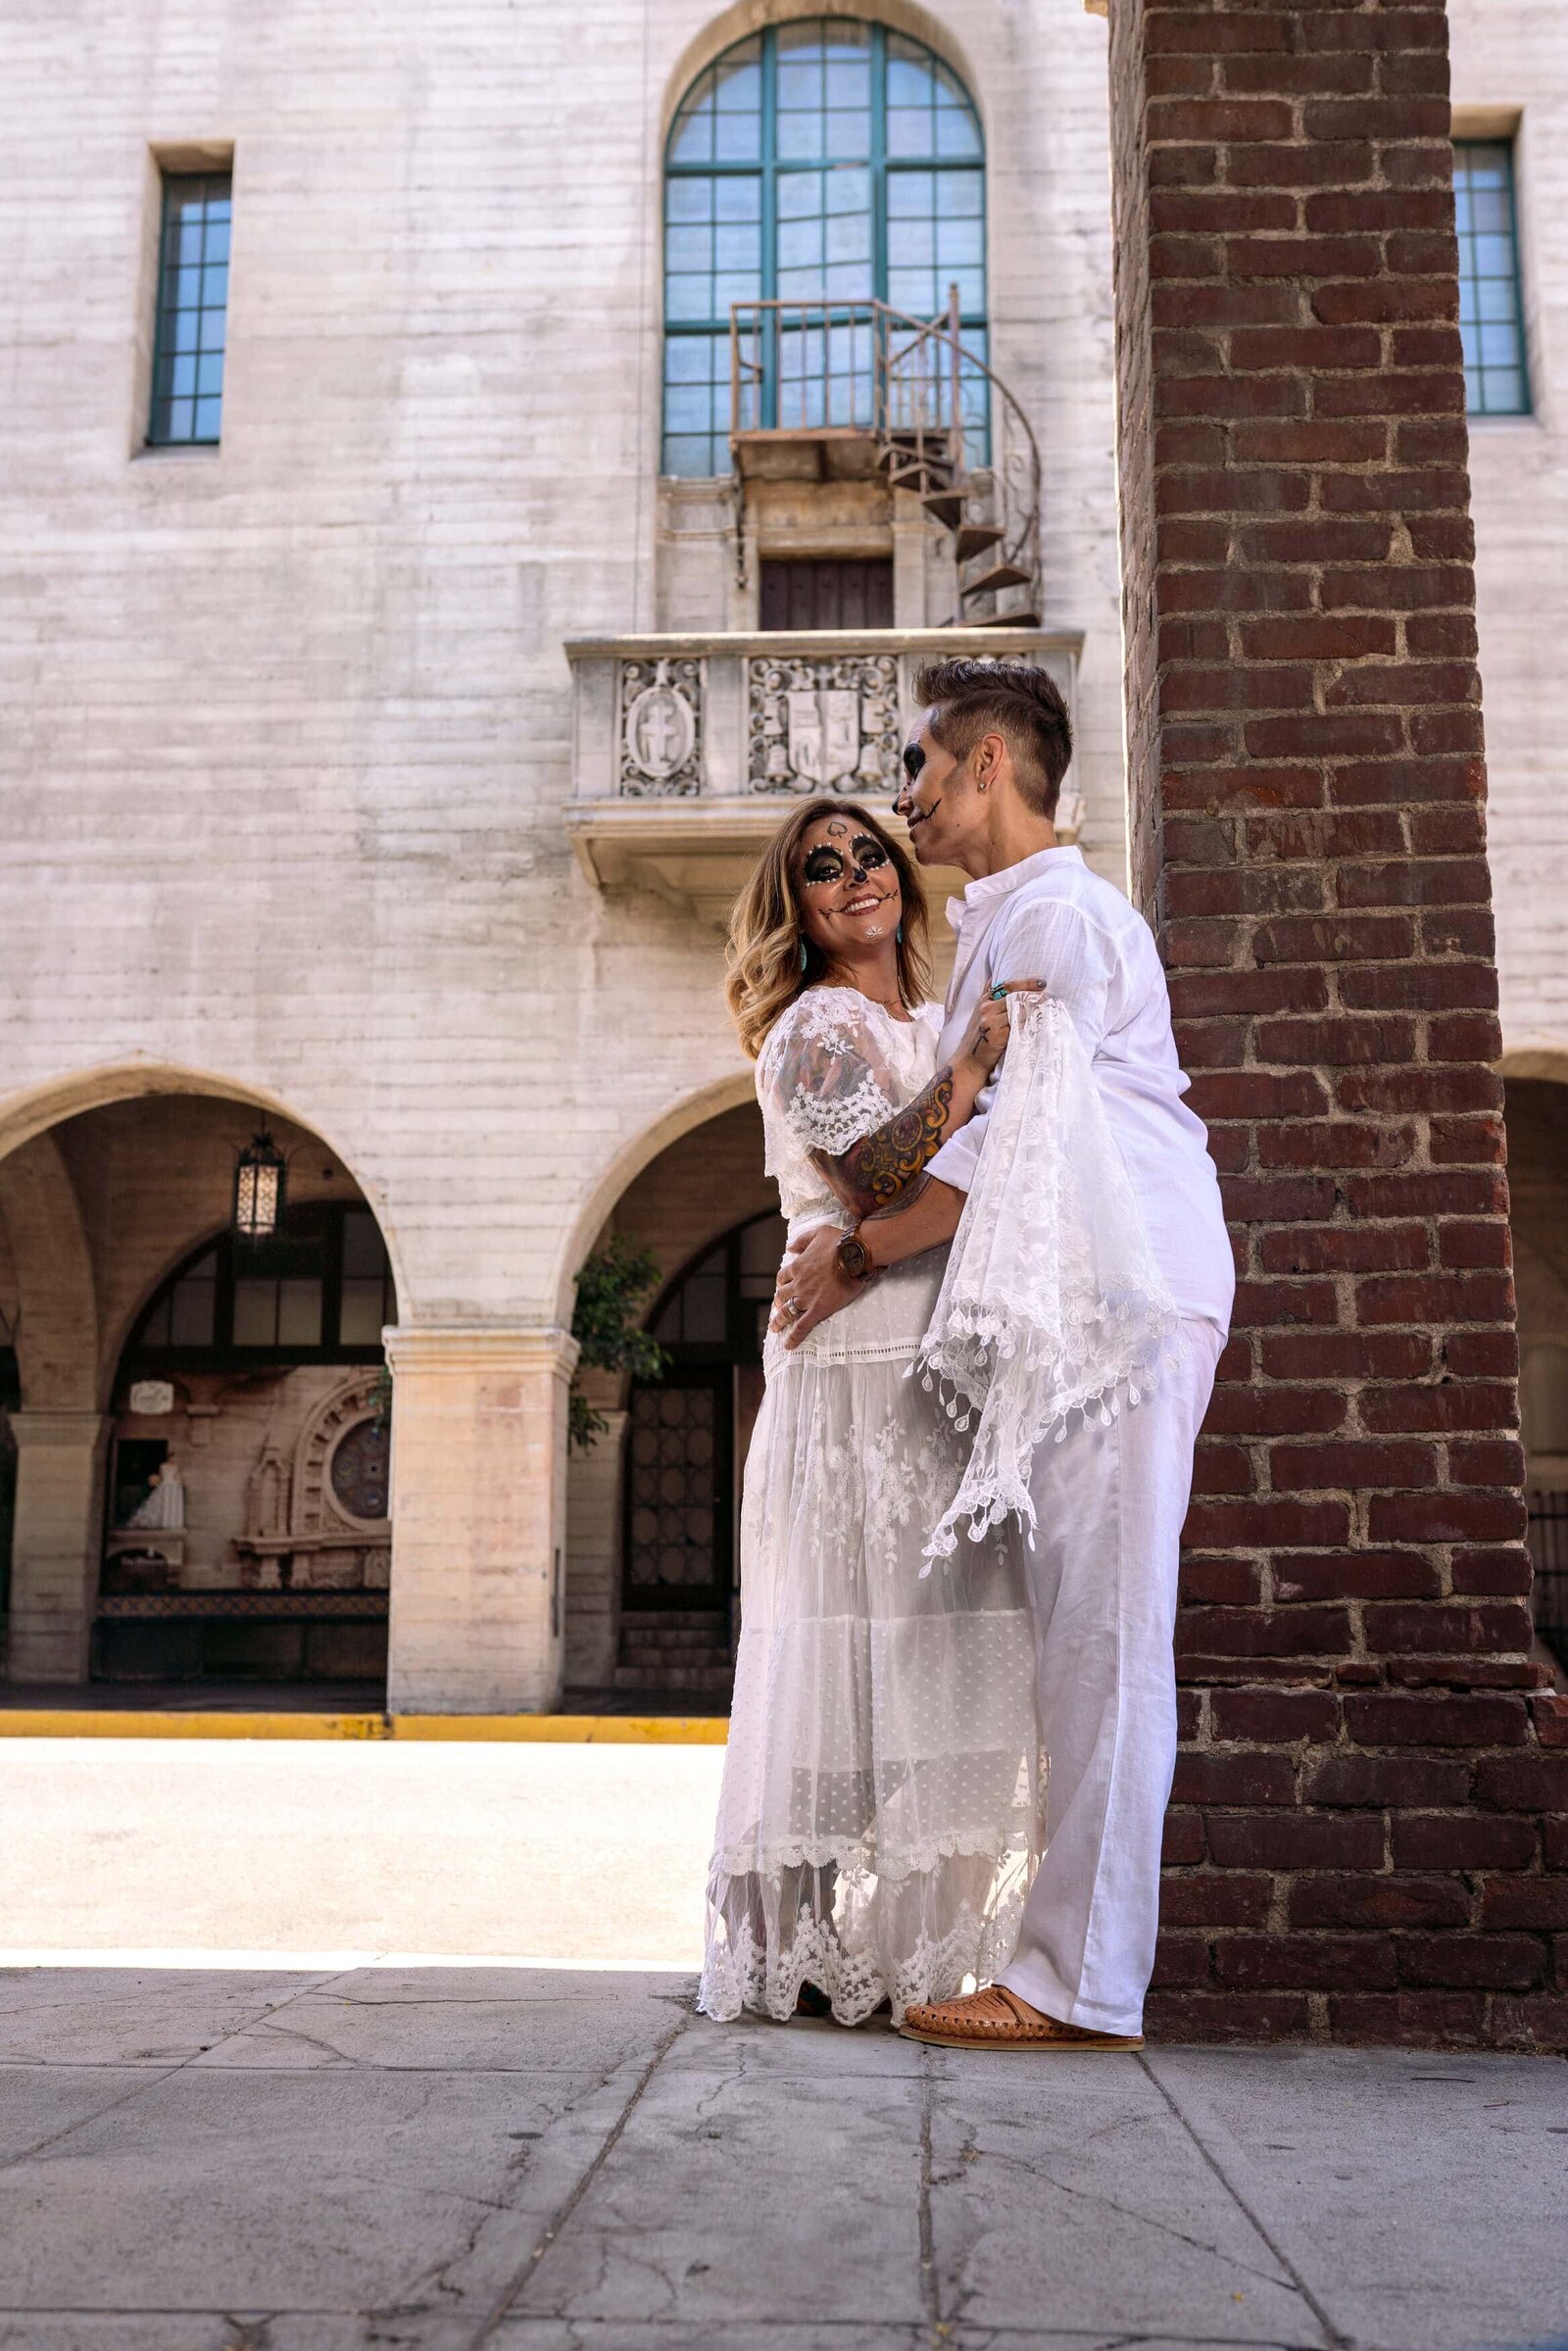 Shorter woman in white dress and painted face hugging fiancee in white  in front of mission inn balcony.